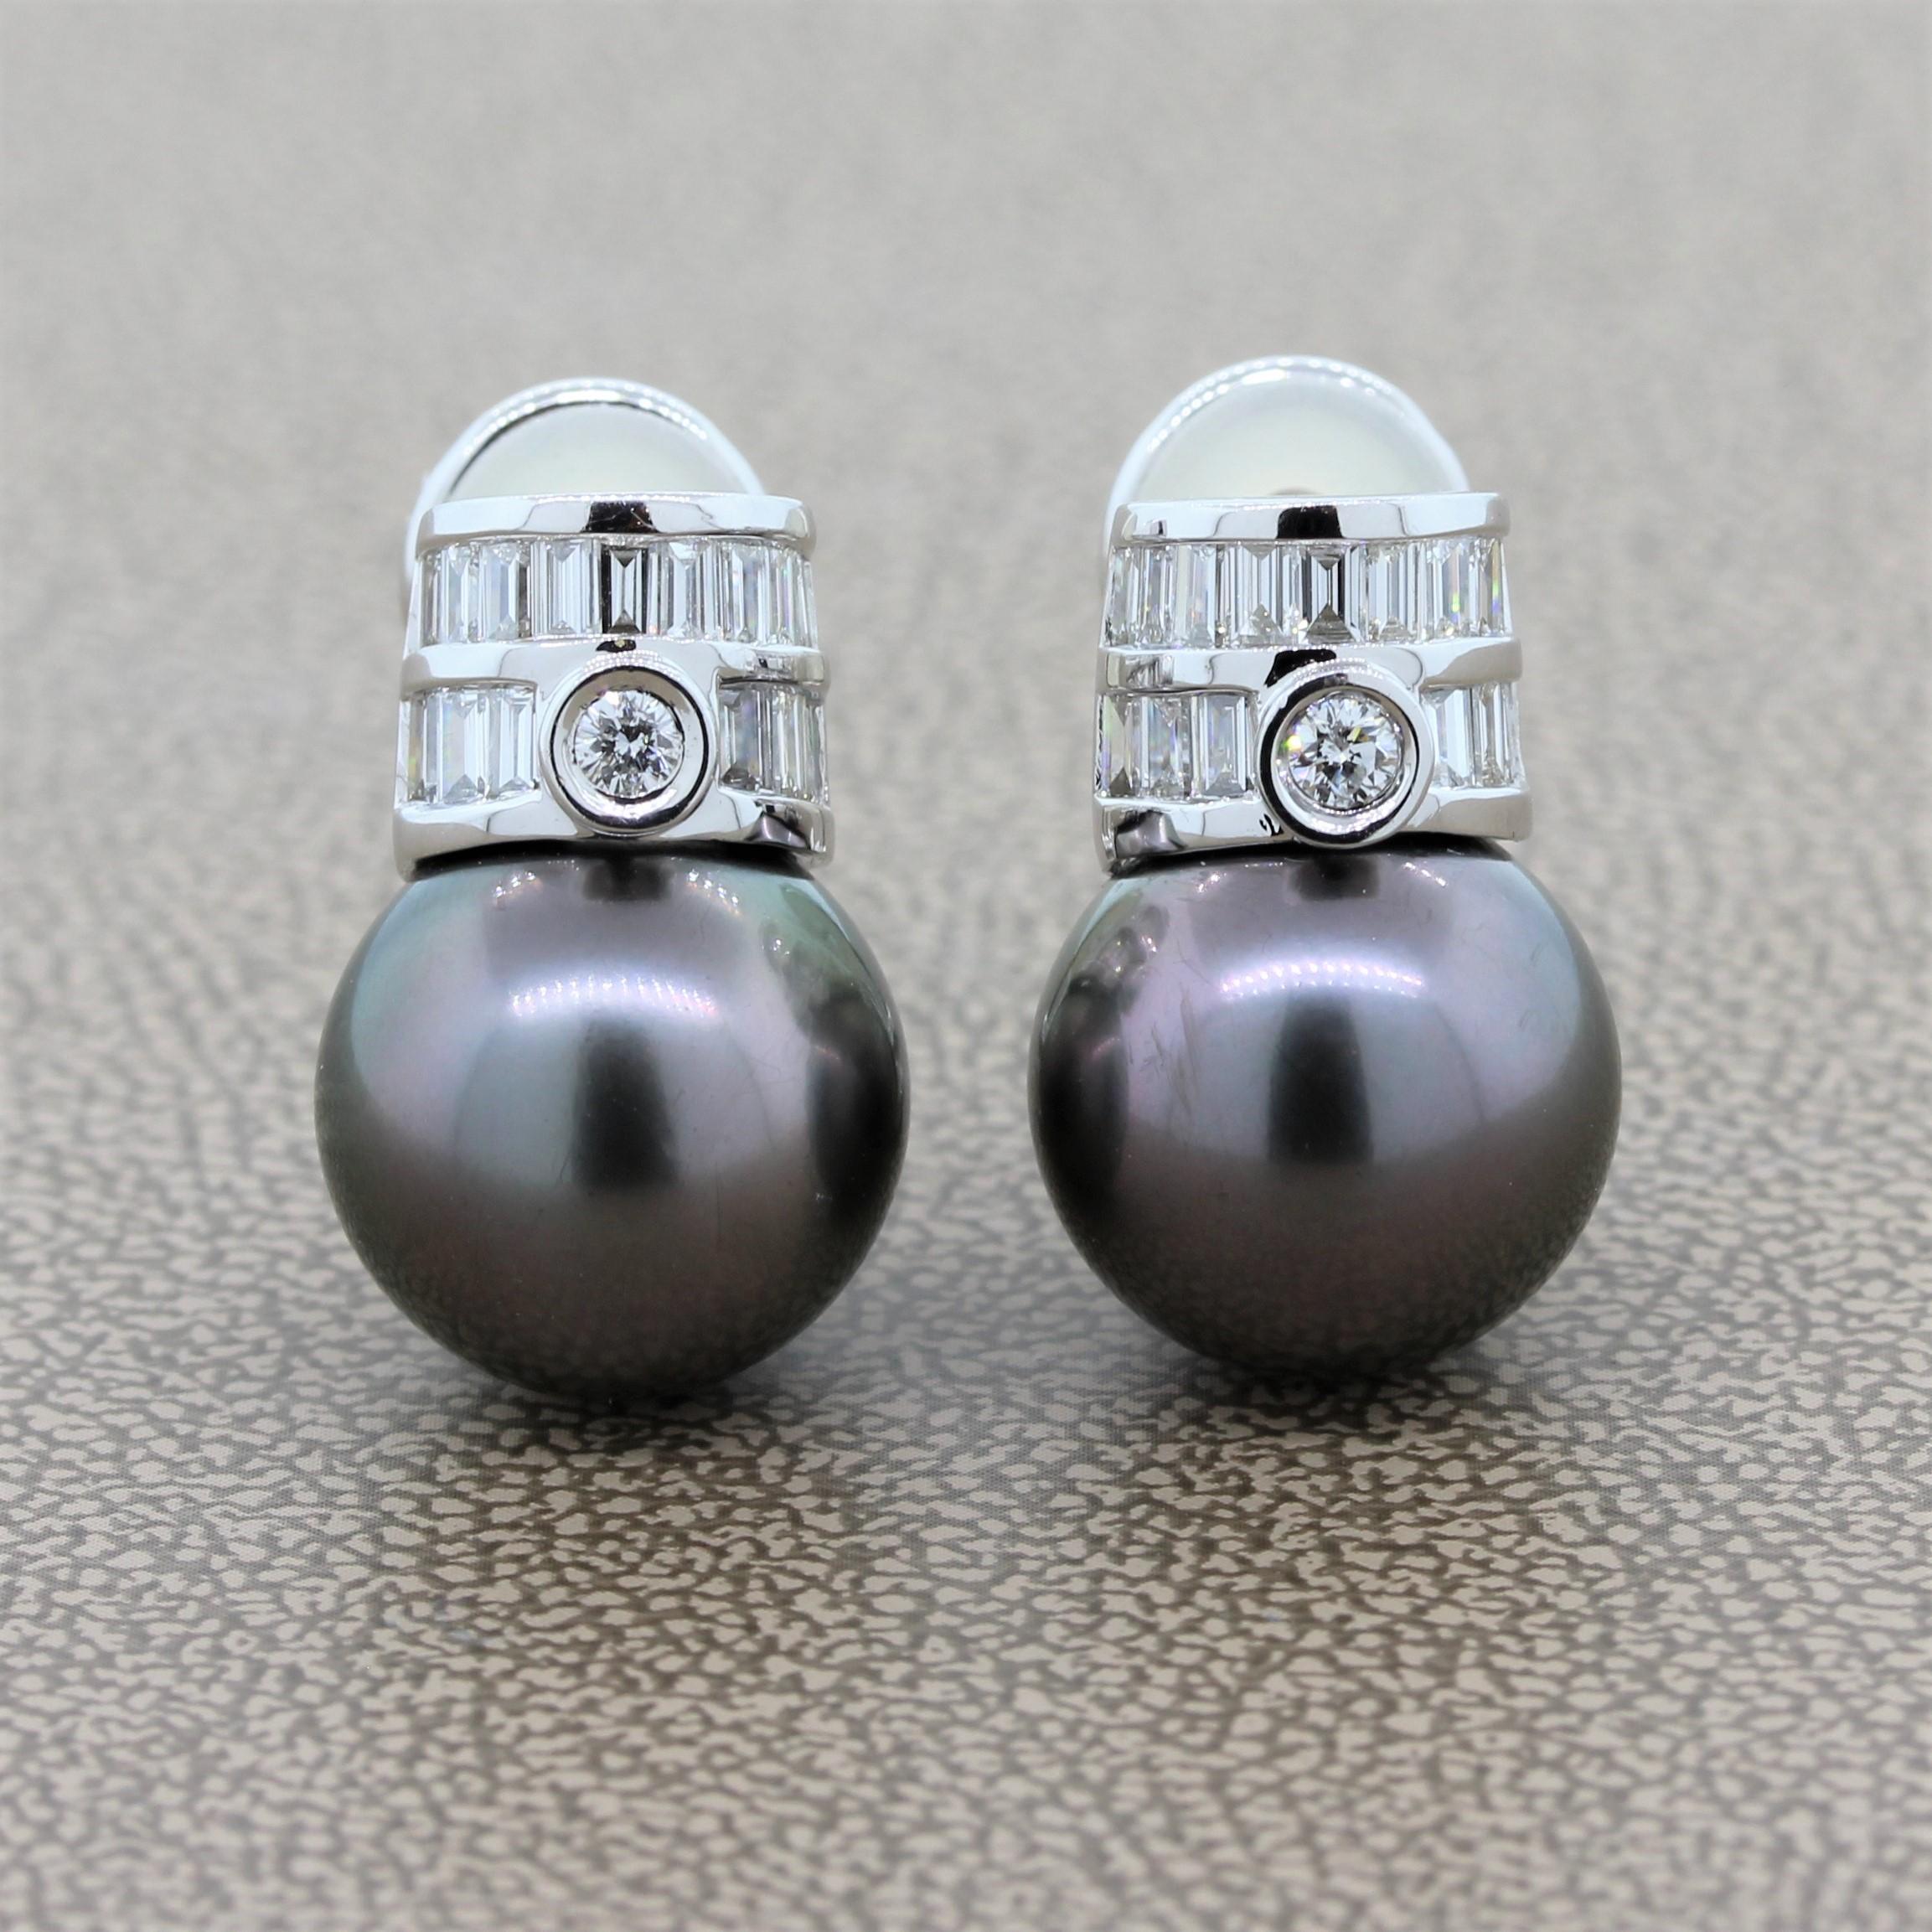 An elegant pair of earrings featuring perfectly round and matching 13mm Tahitian pearls in an 18K white gold setting. The pearls are topped with two rows of channel set baguette cut diamonds with a bezel set round cut diamond in the center totaling